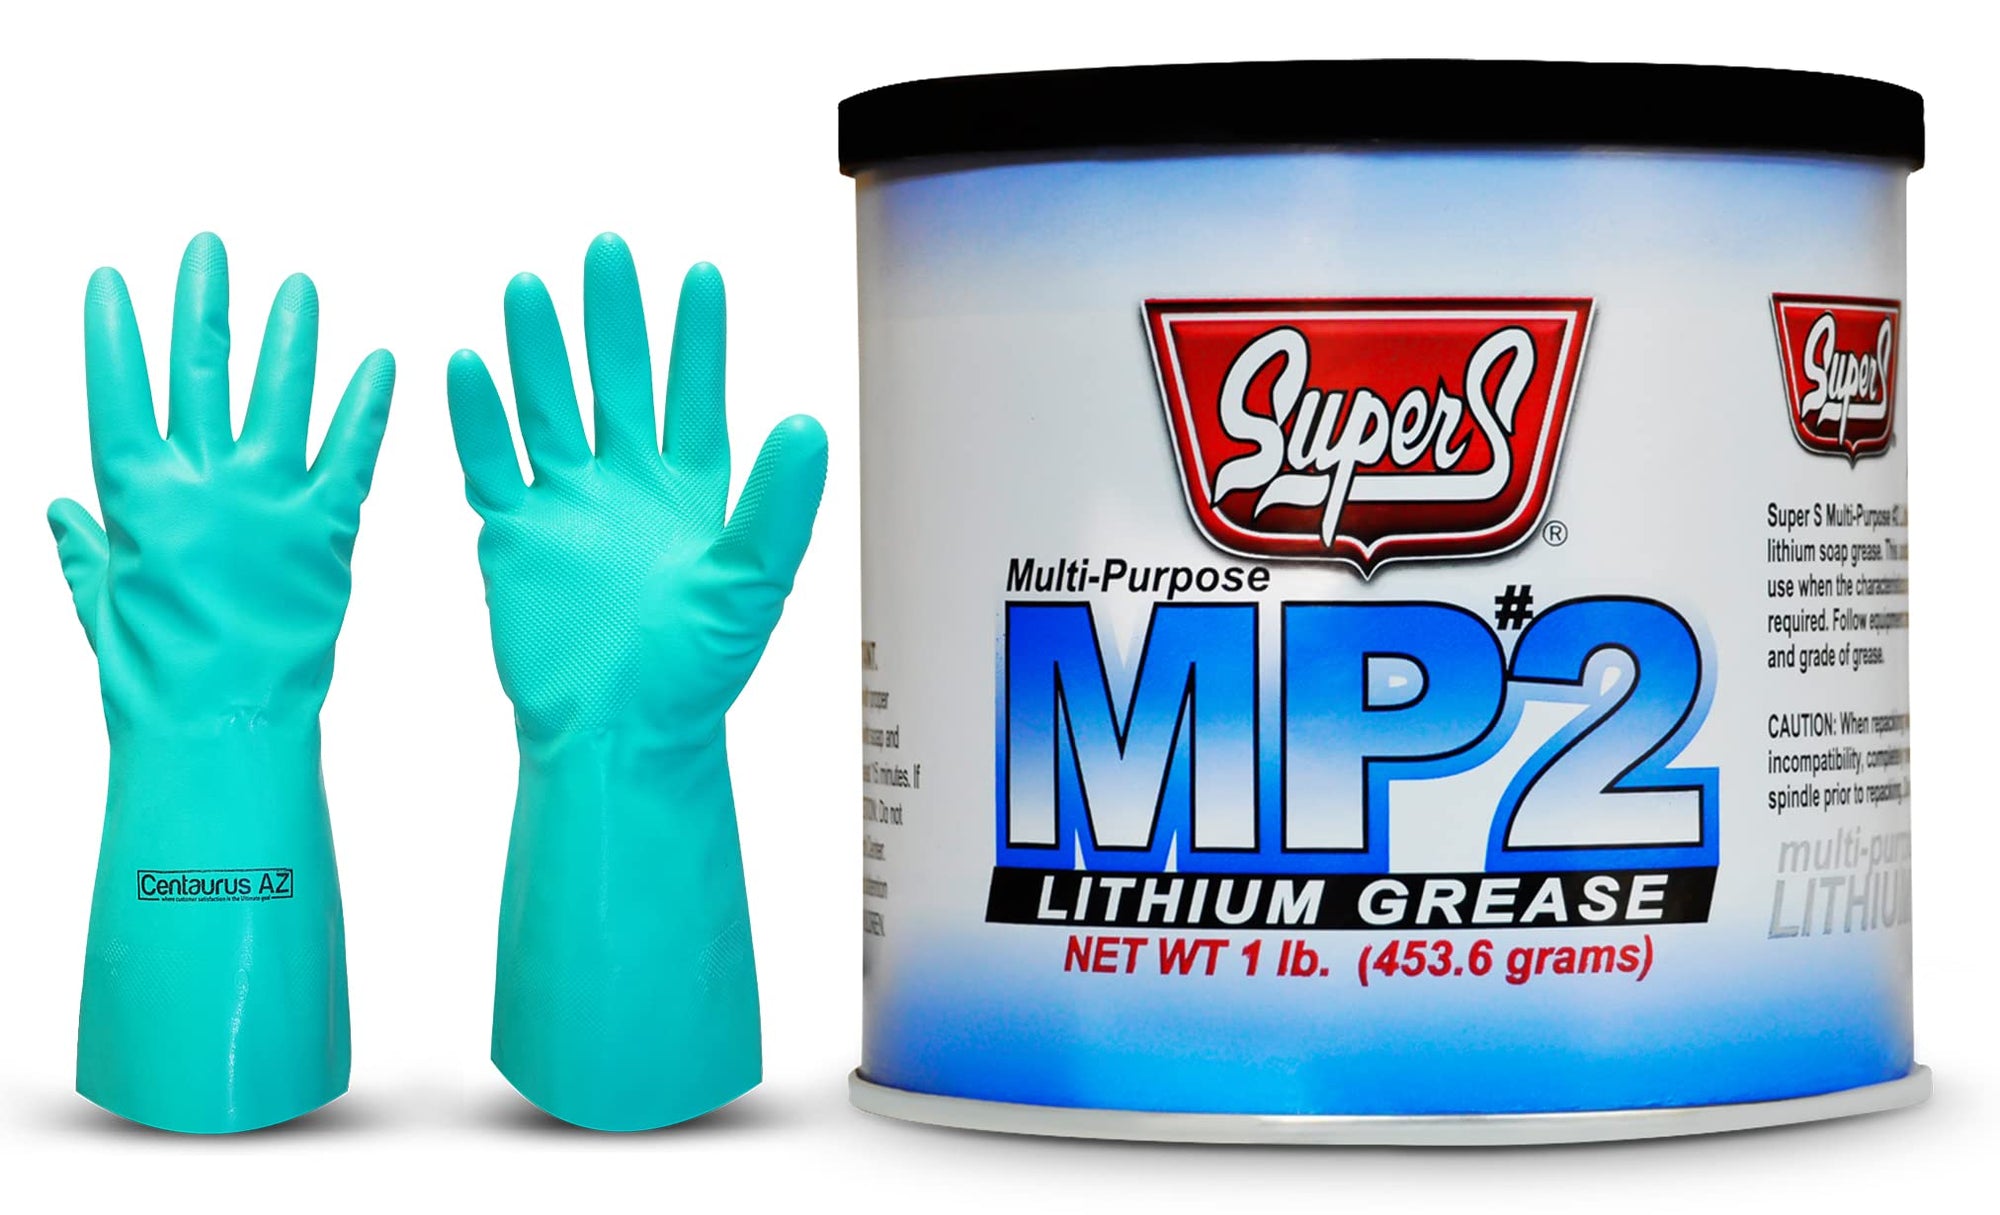 Super S Multi-Purpose Lithium Grease-High Performance Lithium Multipurpose Grease-Effective Automotive Grease-Perfect Lubricant Grease for Applications-Available with Premium Quality Gloves-1lb